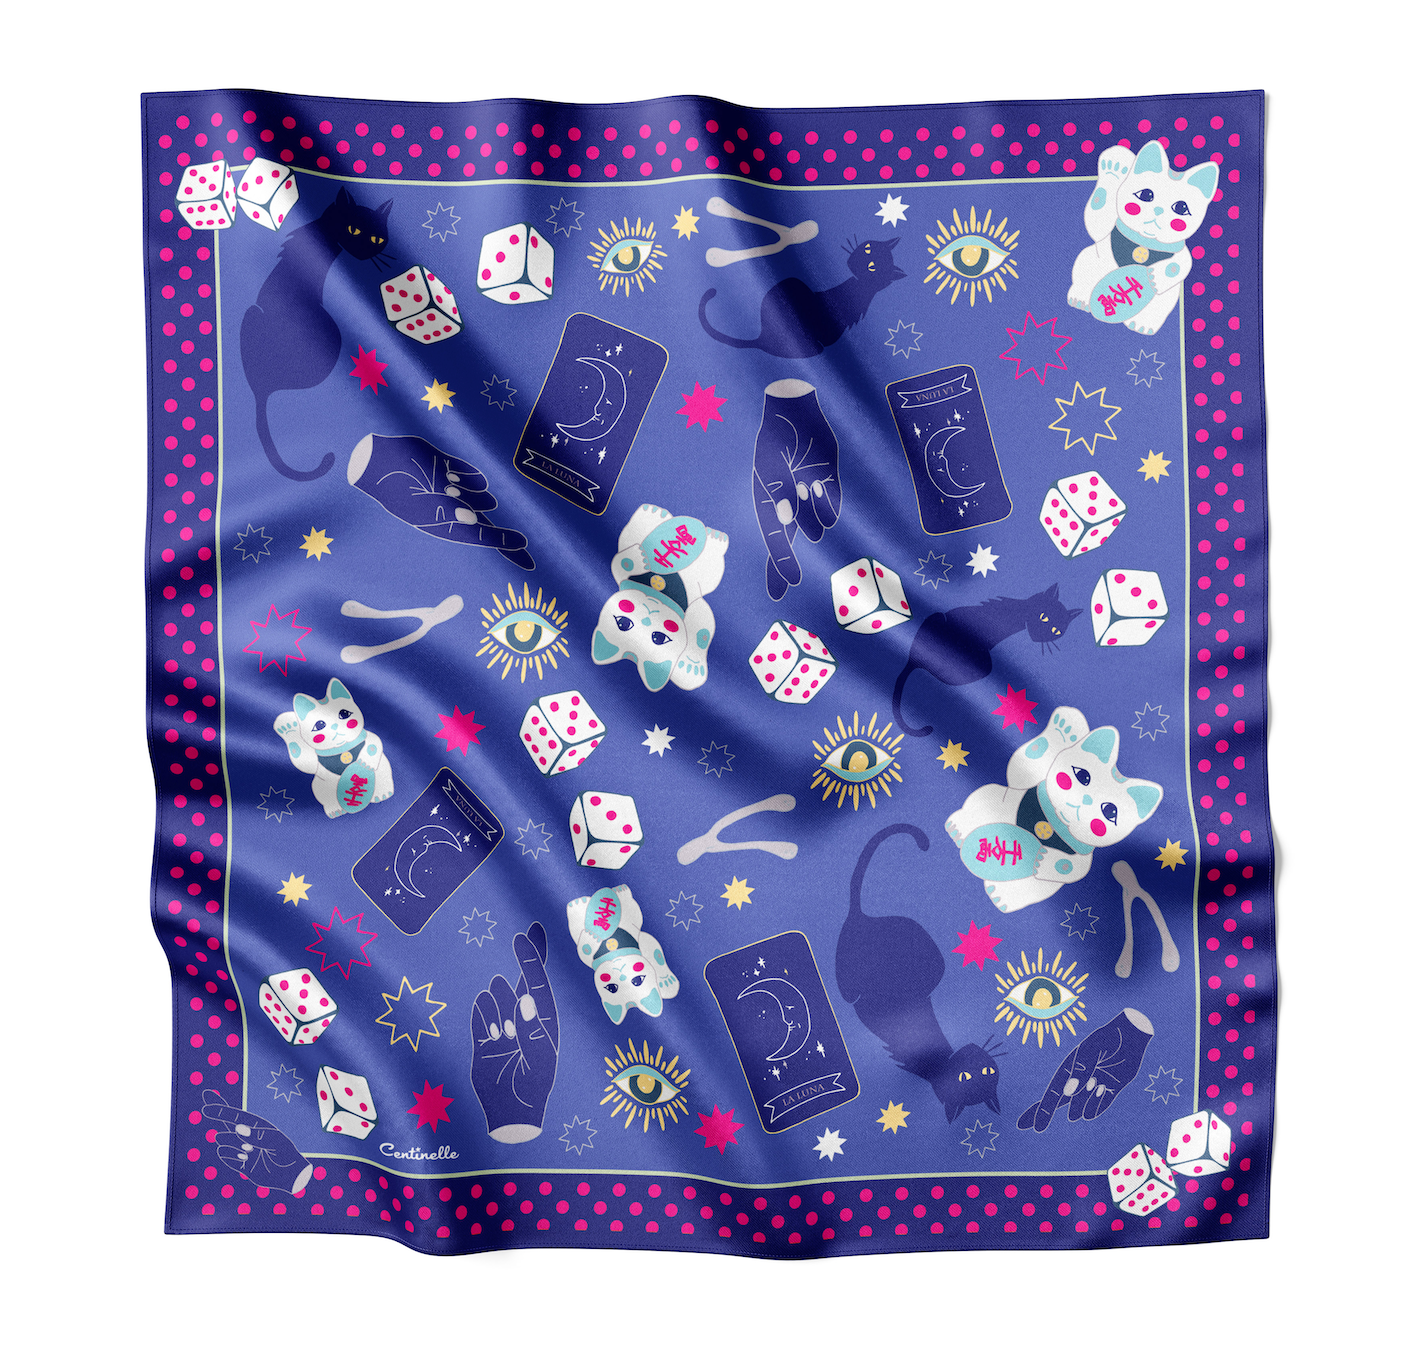 A blue silk scarf with polka dots and cats on it.